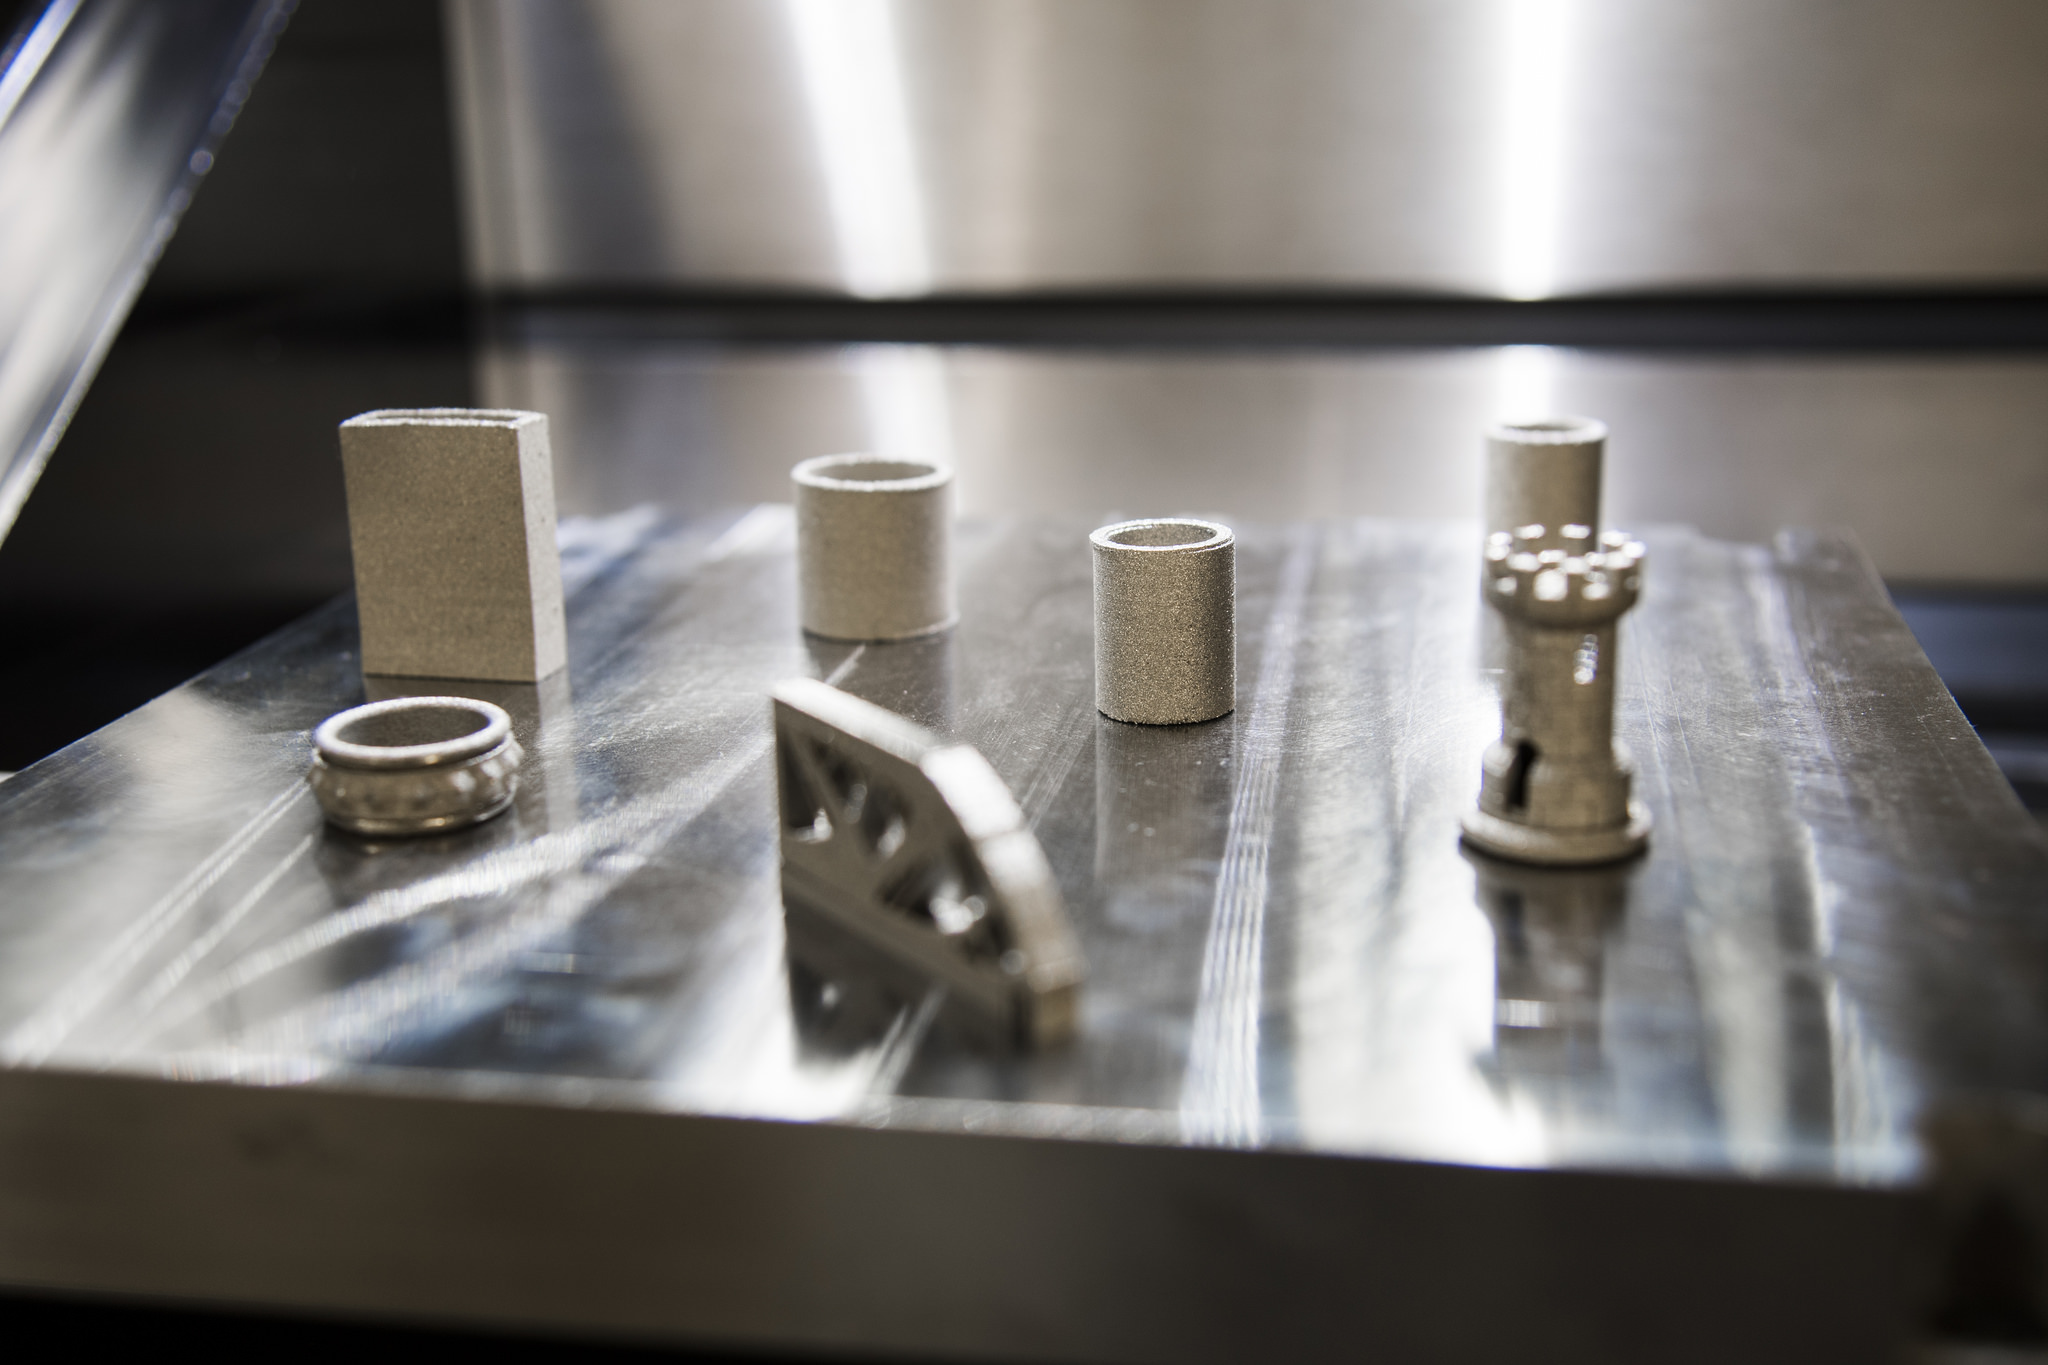 Metal 3D printed samples from a previous project at Auburn. Photo via Auburn University.